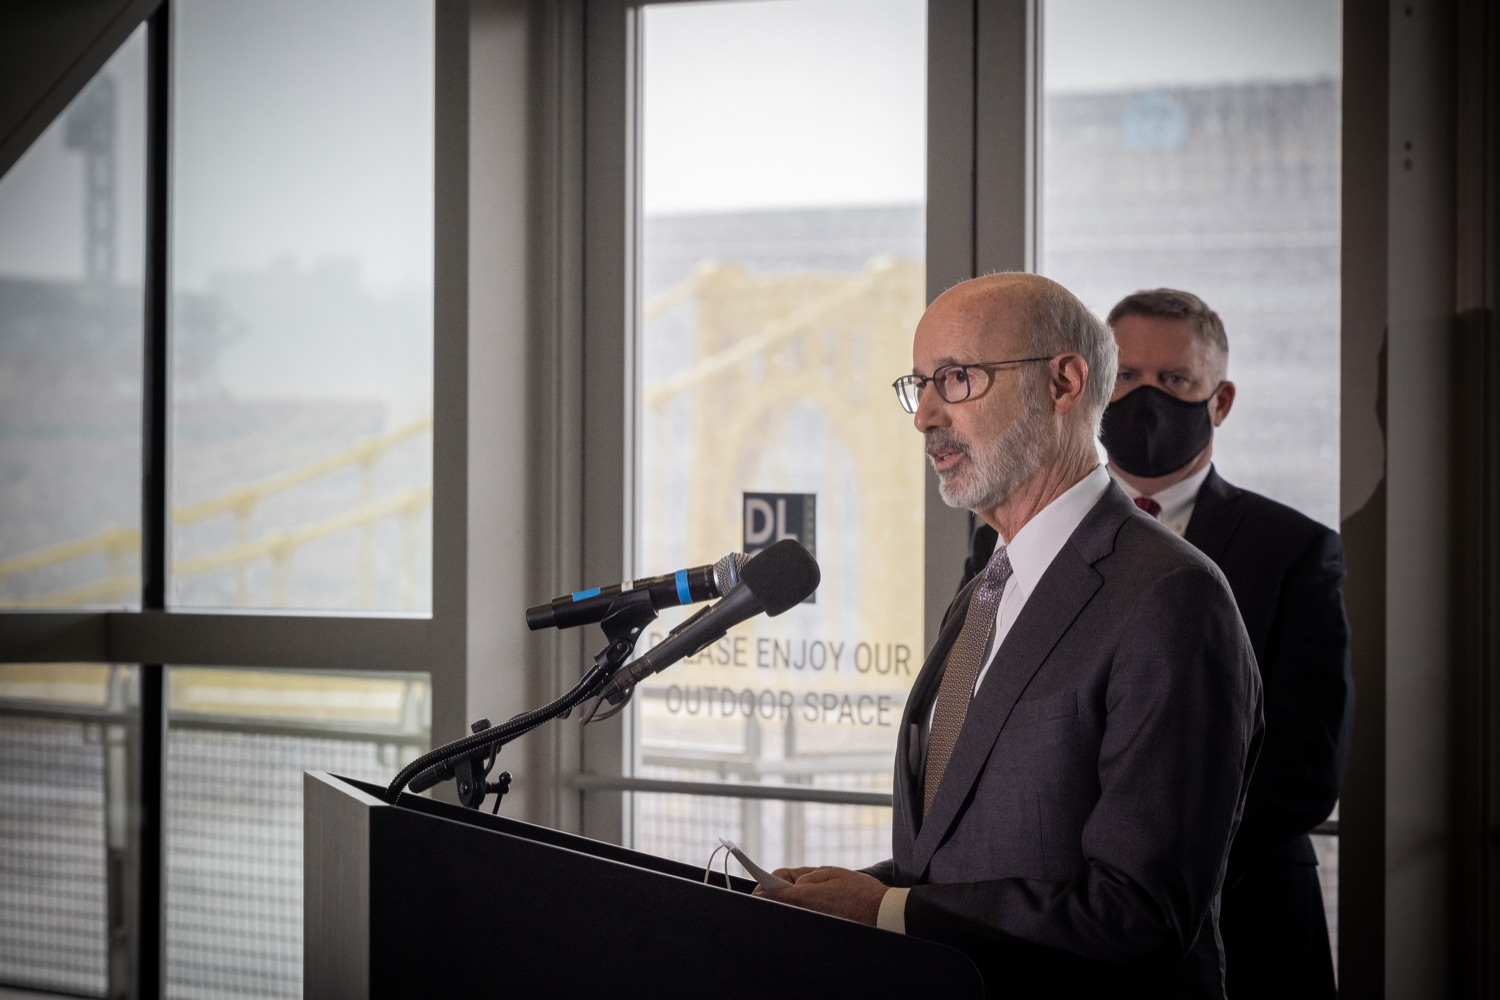 Pennsylvania Governor Tom Wolf speaks with the press.  Governor Tom Wolf and Pennsylvania Department of Transportation (PennDOT) Deputy Secretary for Multimodal Transportation Jennie Louwerse were joined by Federal Railroad Administration Administrator Amit Bose, Norfolk Southern (NS) Regional Vice President Rudy Husband and local officials today to announce that the federal Bipartisan Infrastructure Law (BIL) has paved the way for movement toward improved freight and passenger-rail service between Harrisburg and Pittsburgh. Pittsburgh, PA  February 18, 2022<br><a href="https://filesource.amperwave.net/commonwealthofpa/photo/20547_gov_infrastructure_dz_019.jpg" target="_blank">⇣ Download Photo</a>